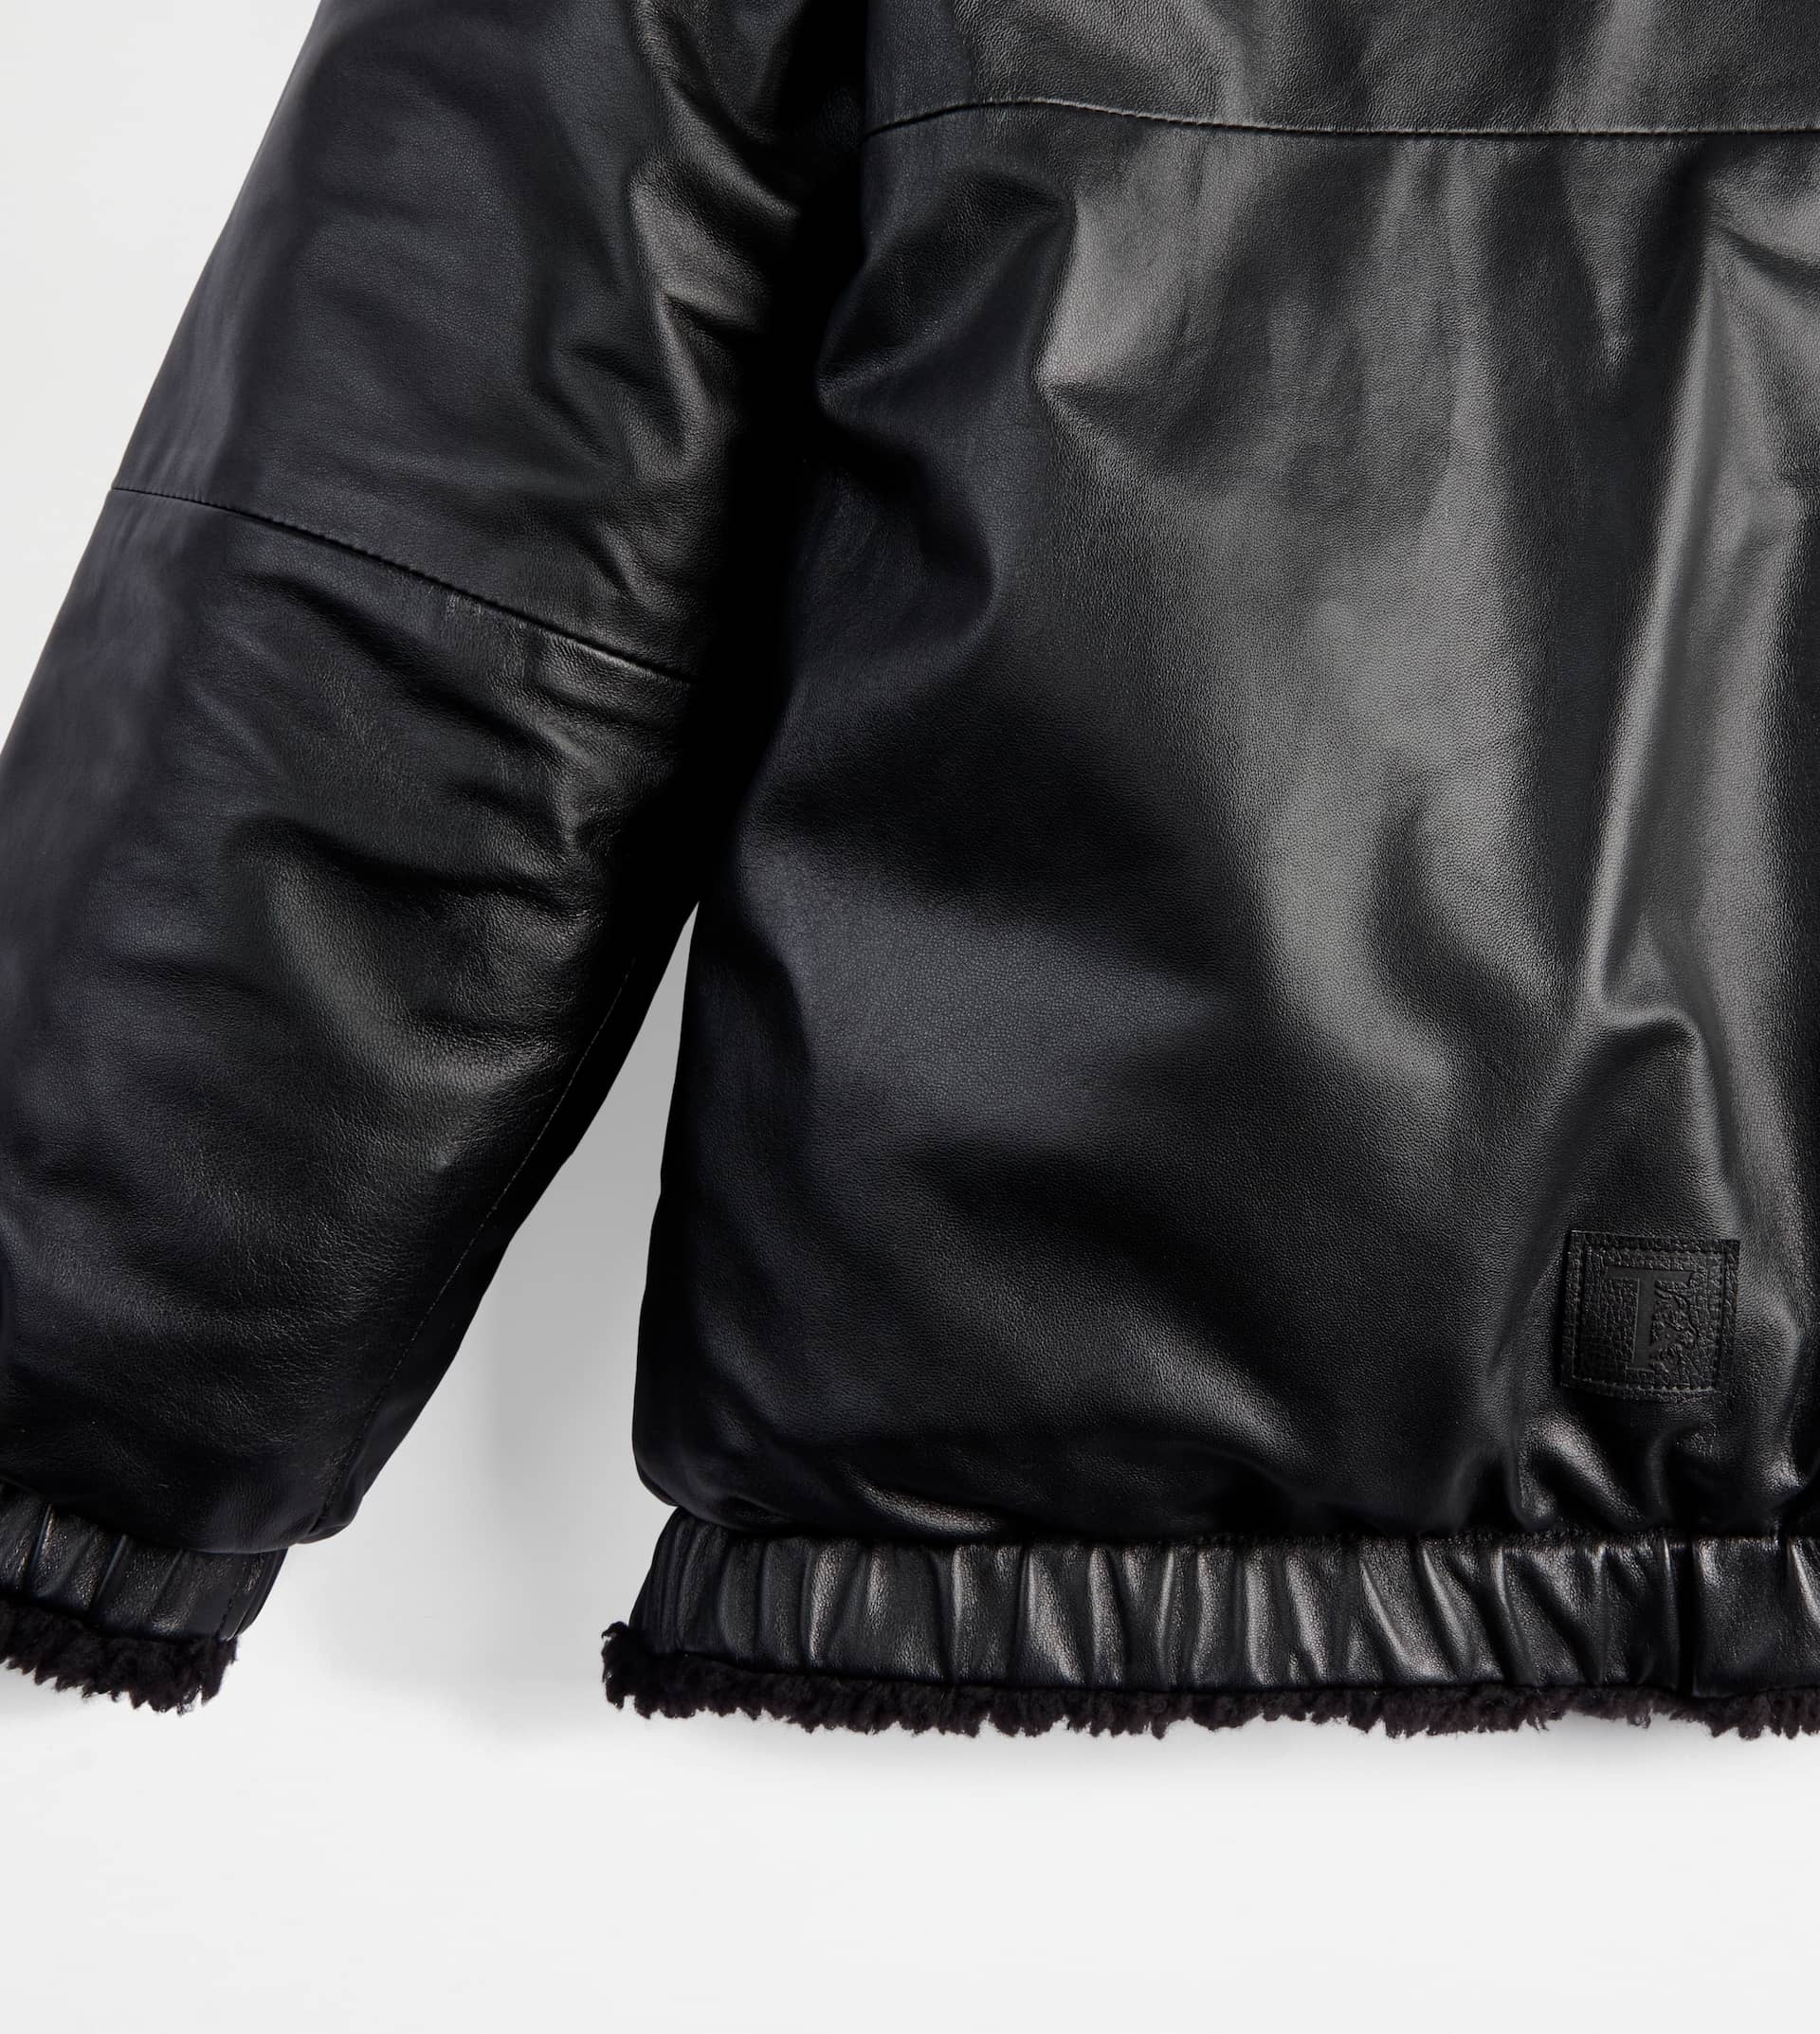 TOD'S BOMBER JACKET IN LEATHER - BLACK - 6